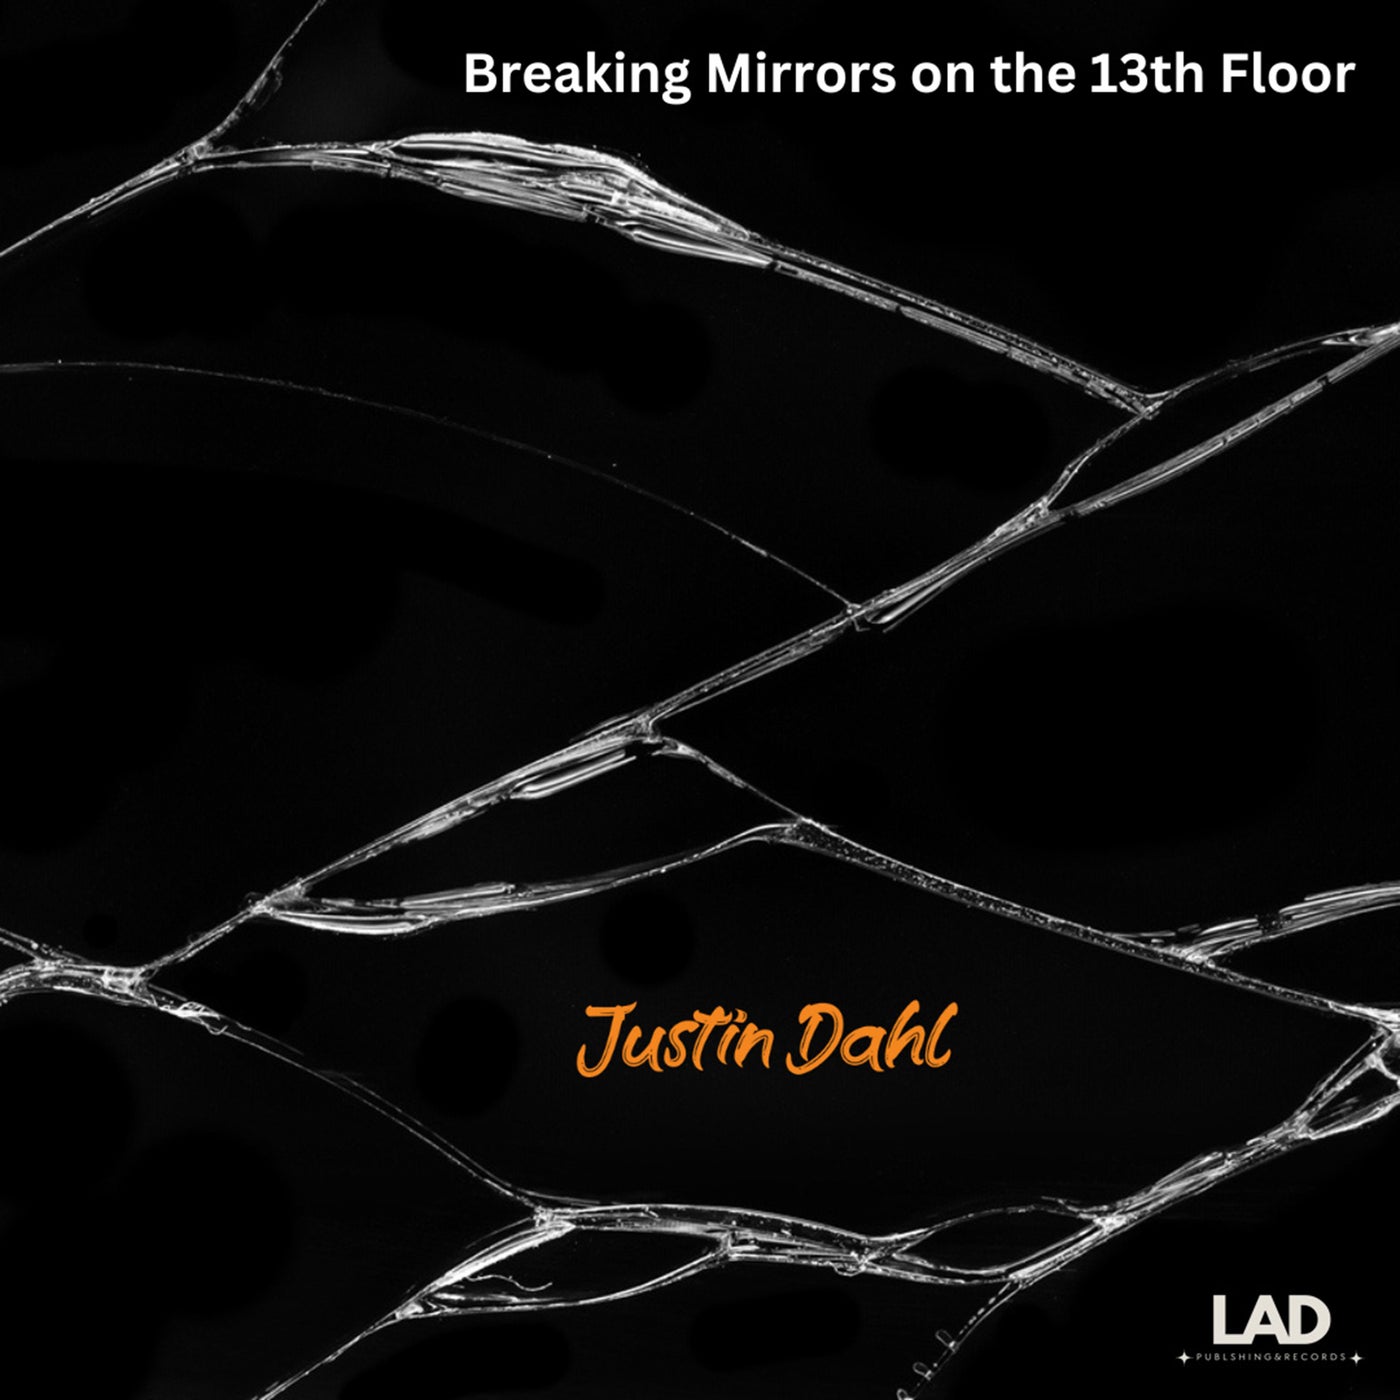 Breaking Mirrors on the 13th Floor